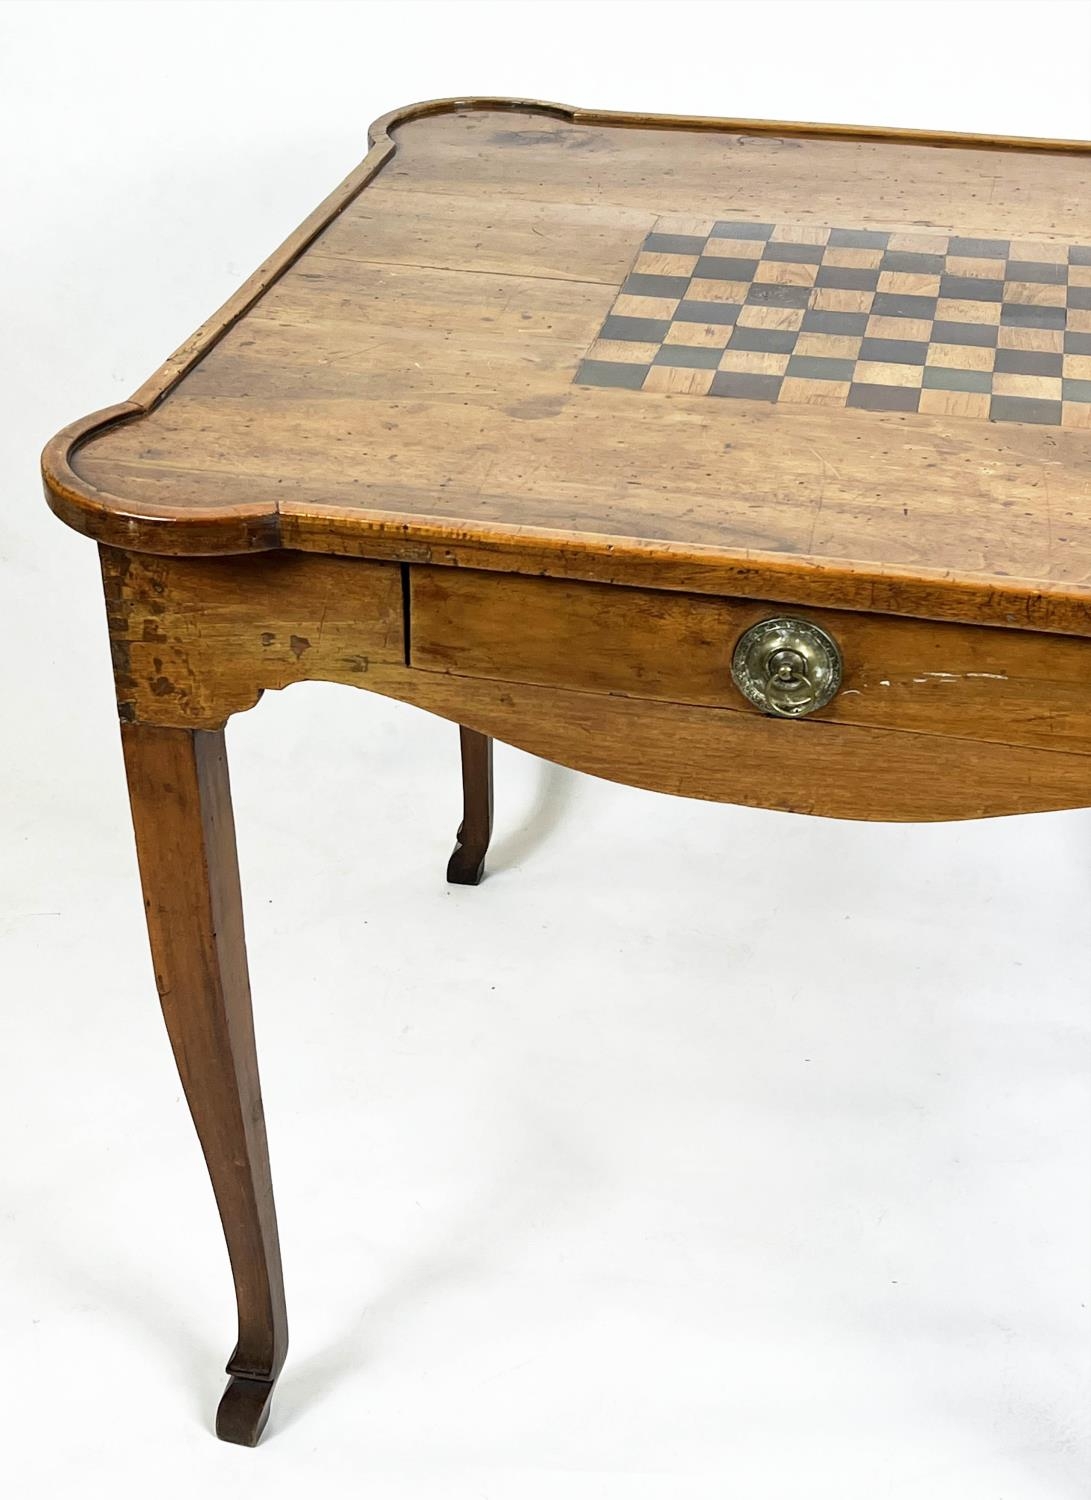 GAMES TABLE, 73cm H x 84cm W x 82cm D 18th century Italian walnut with chessboard inlaid top and - Image 2 of 7